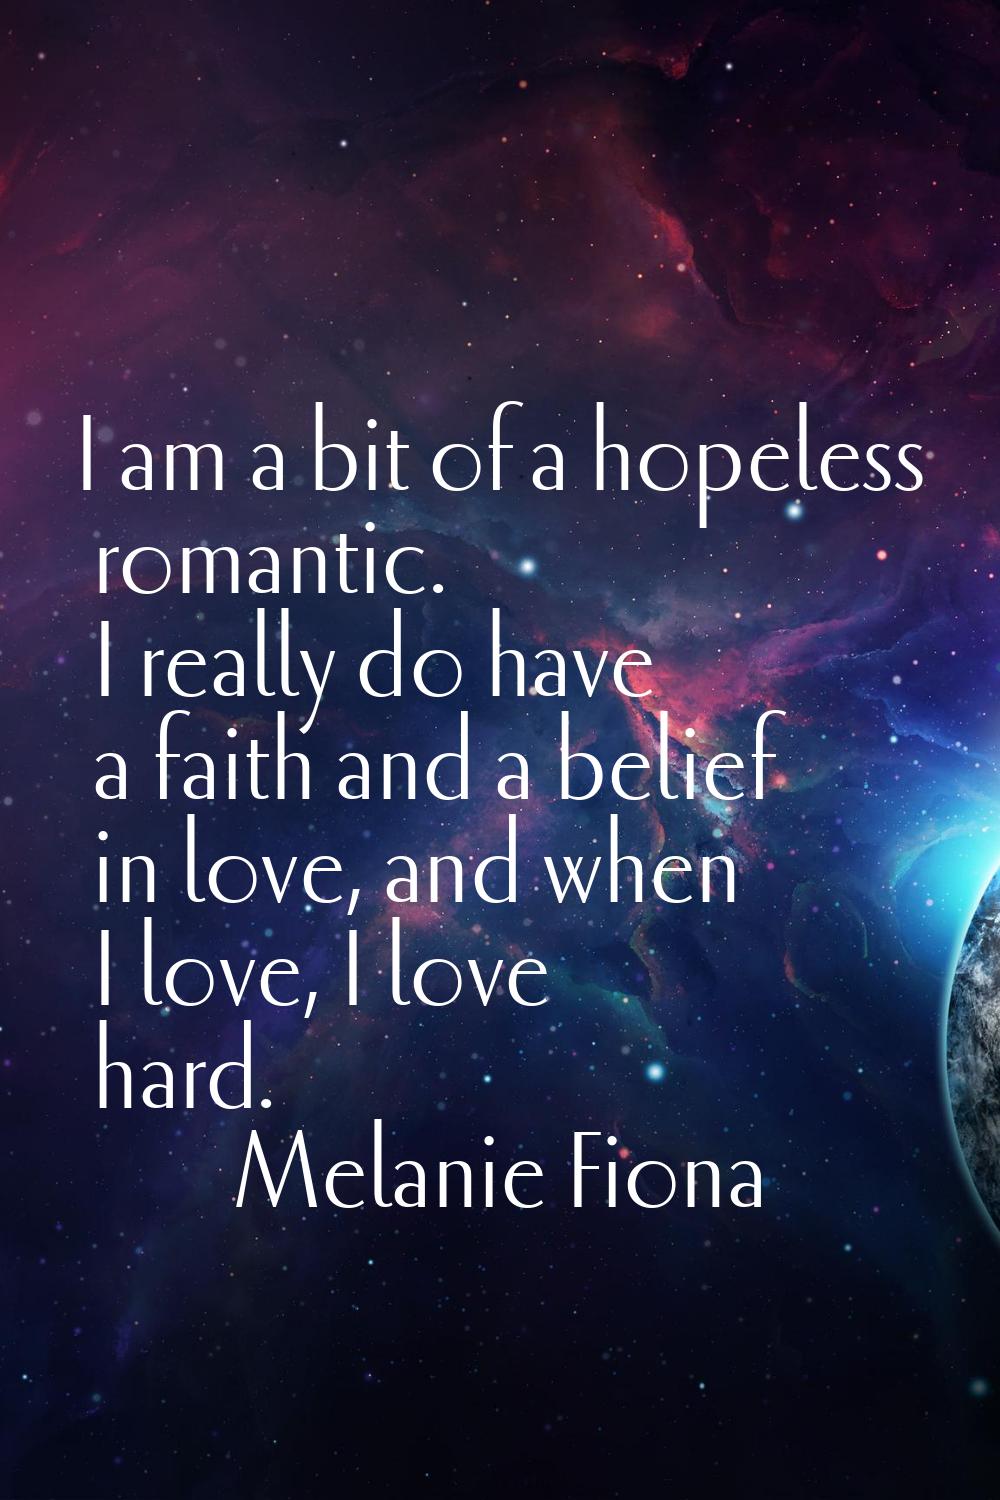 I am a bit of a hopeless romantic. I really do have a faith and a belief in love, and when I love, 